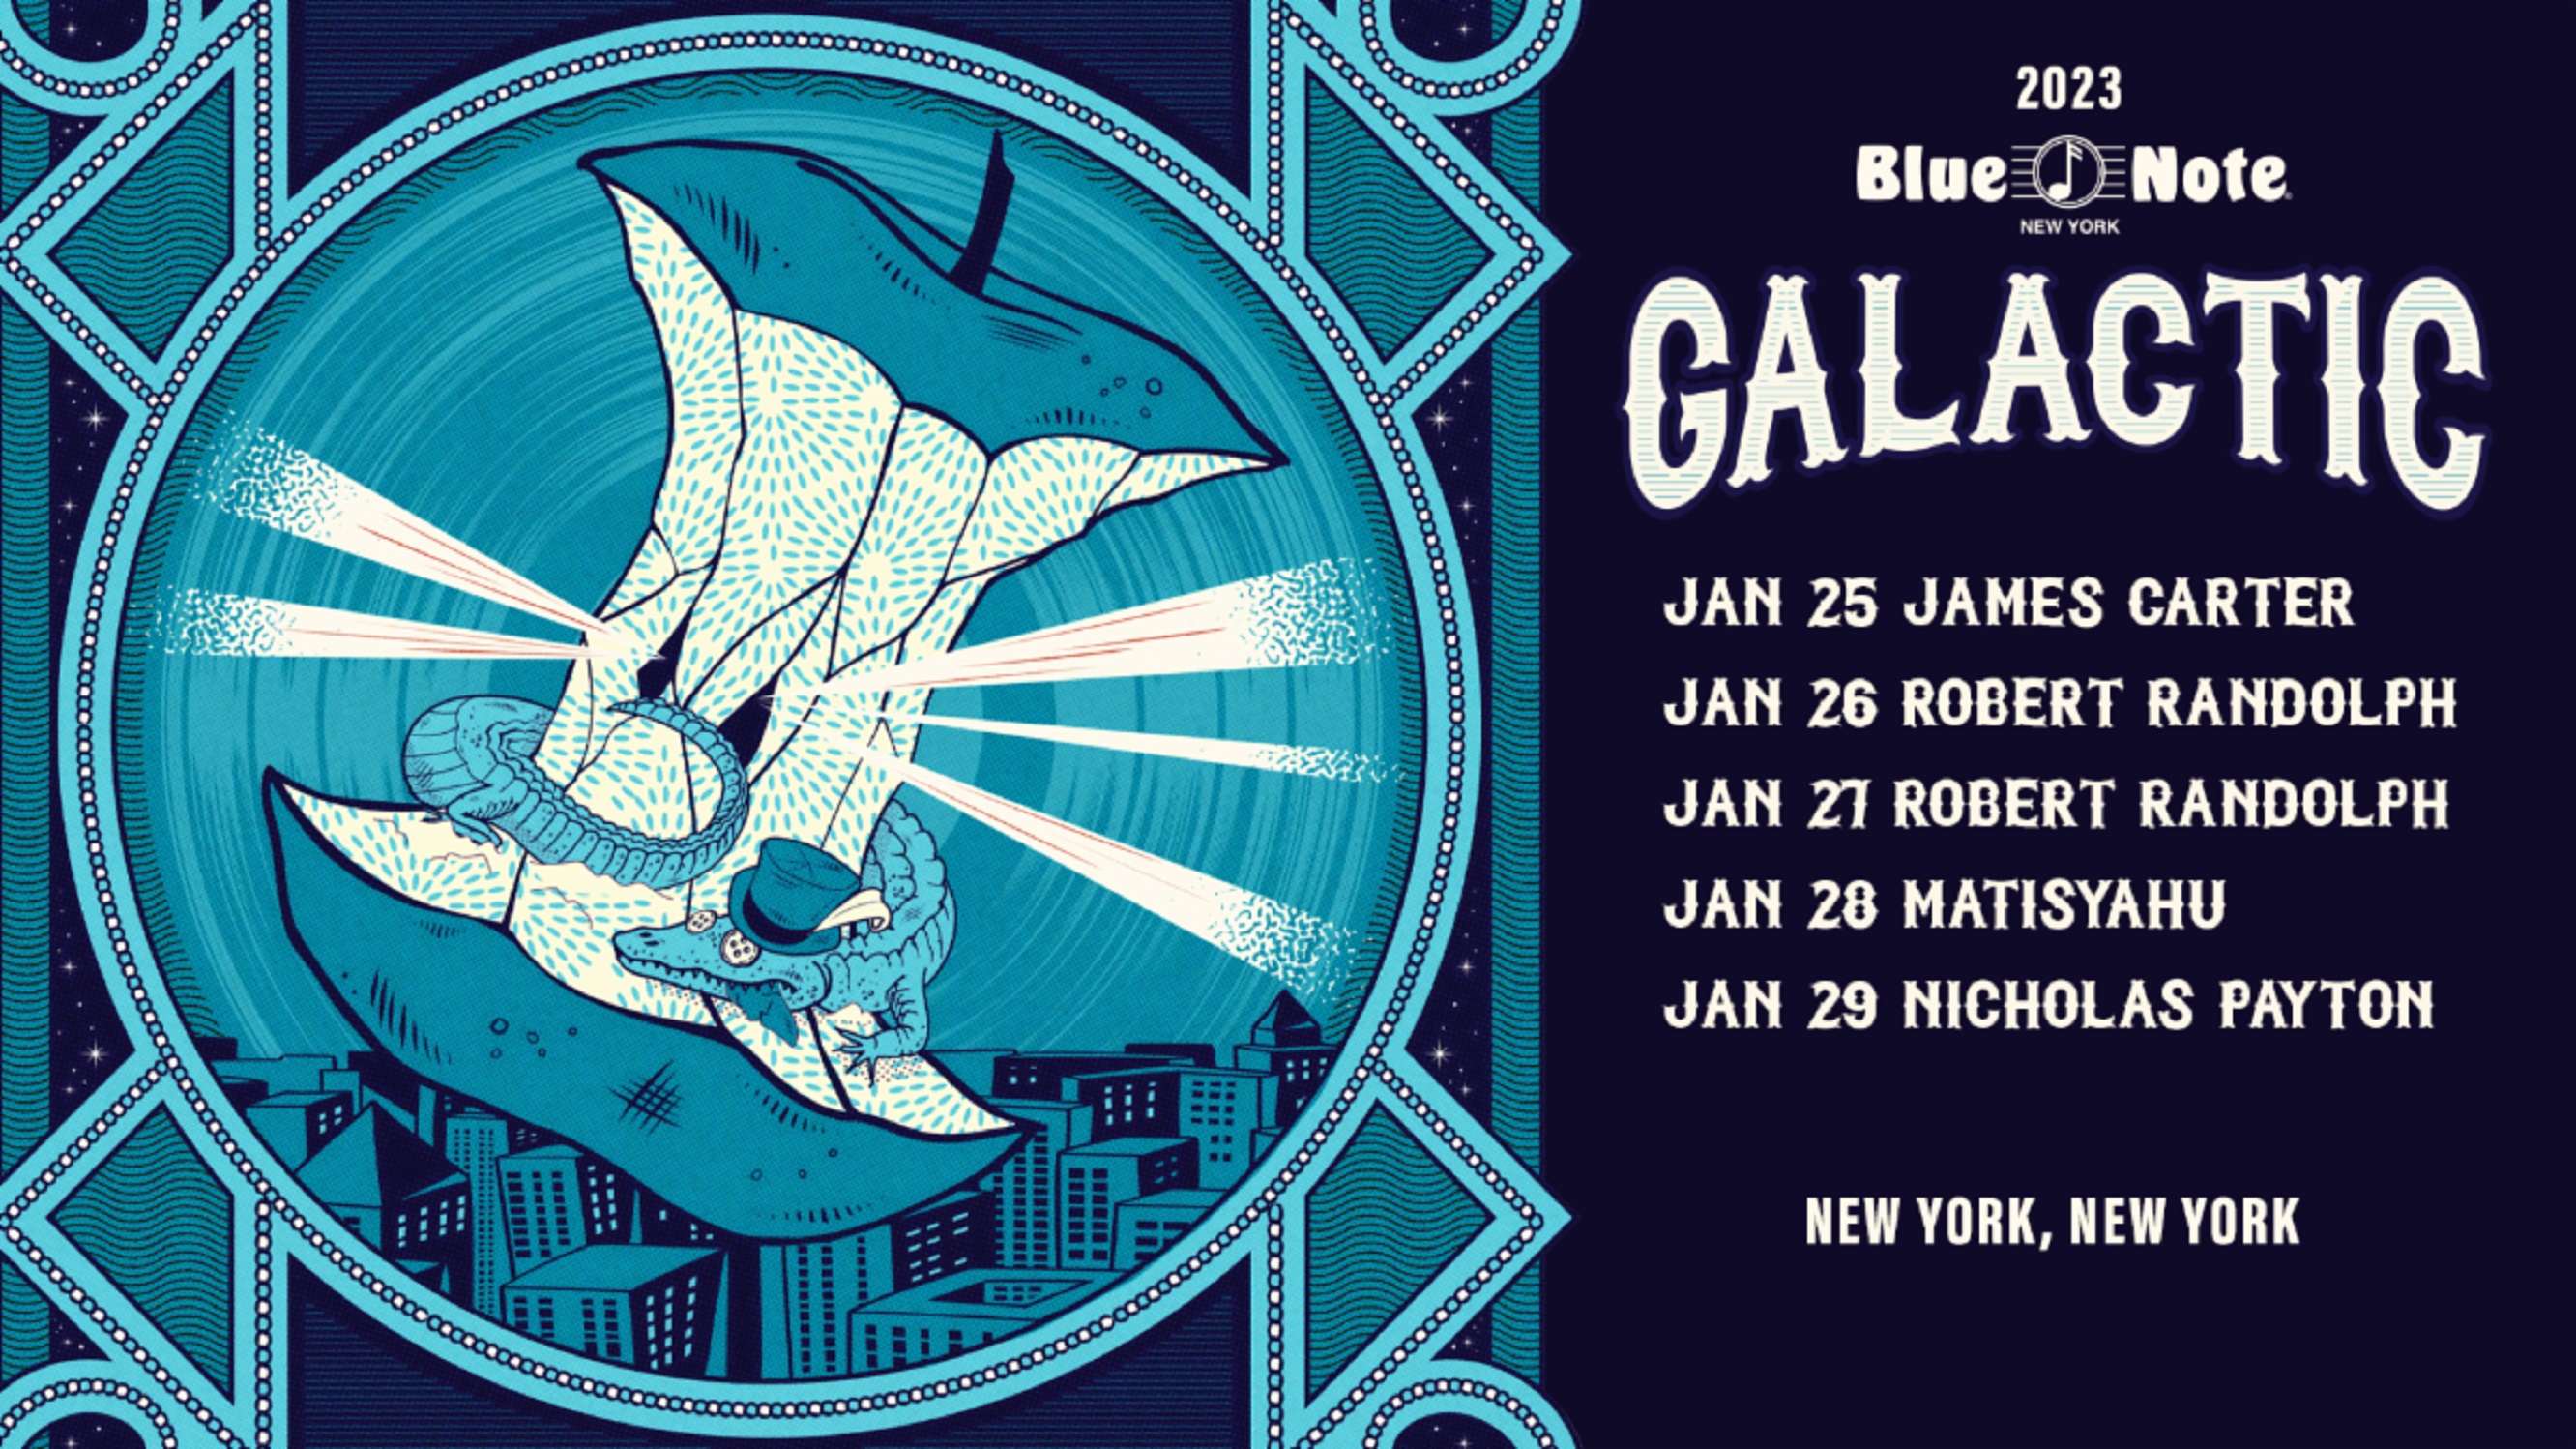 Galactic share new single featuring Cimafunk; 10-show Blue Note NYC residency kicks off Jan 25